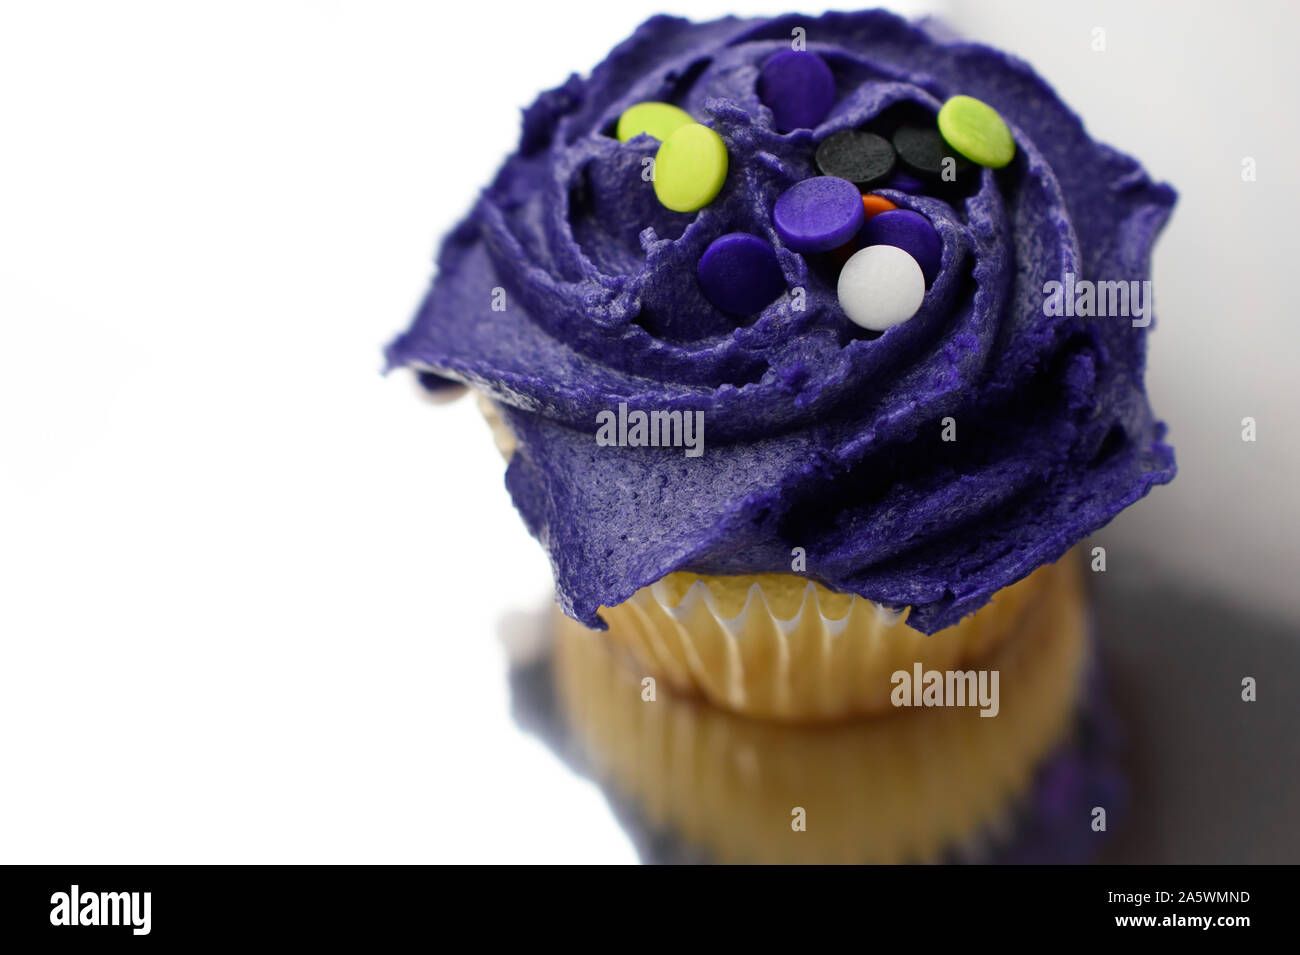 Closeup of Halloween Cupcake Iced with Purple Frosting and Multicolored Confetti Dots Stock Photo